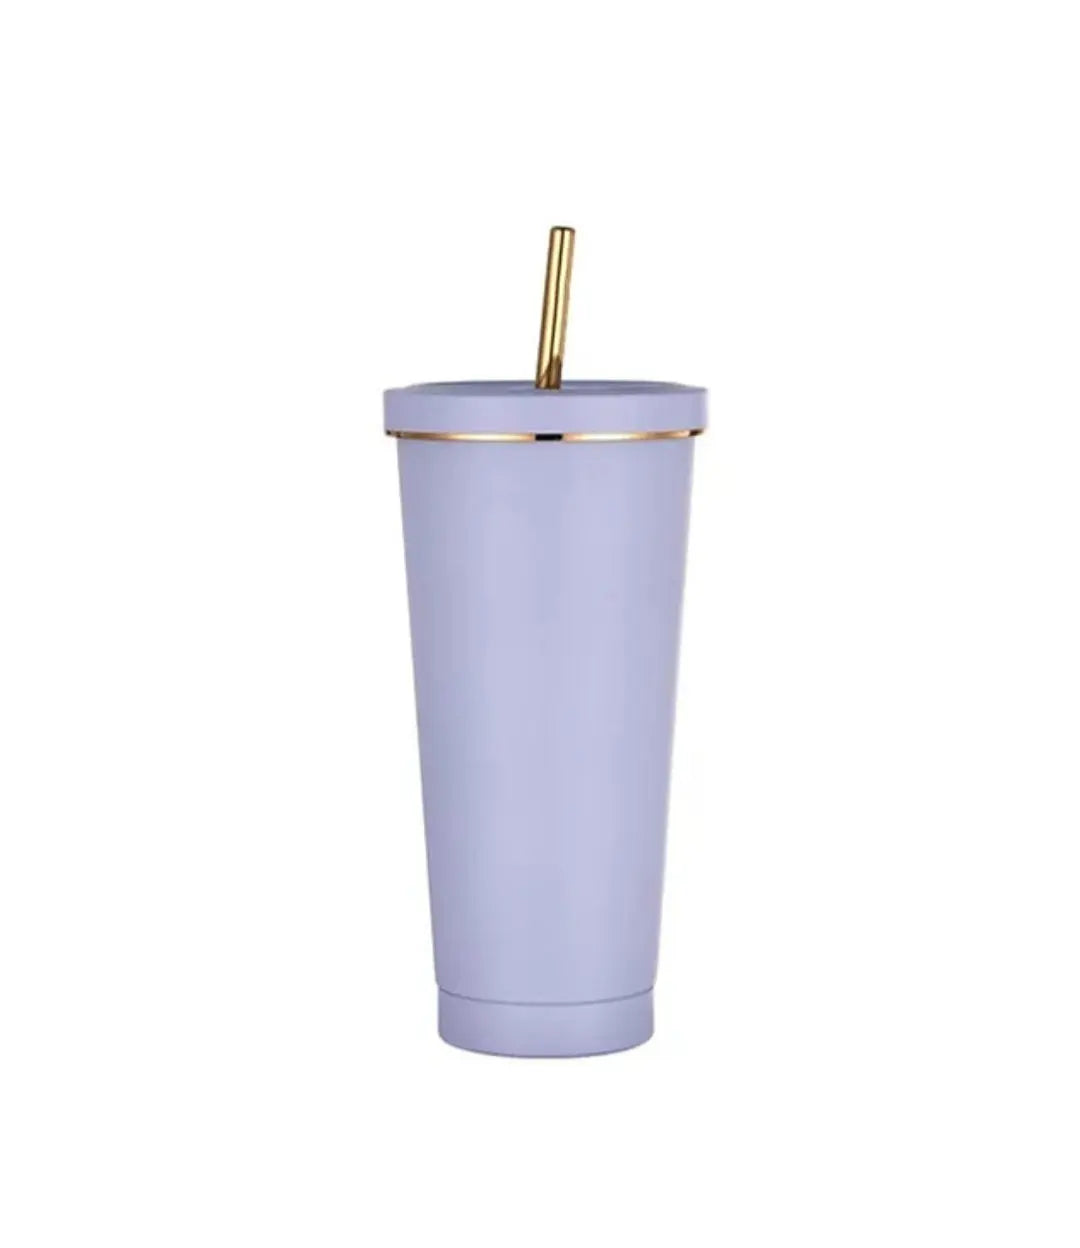 750ml/25oz Stainless Steel Travel Mug with Straw and Lid and straw cleaner - Image #10